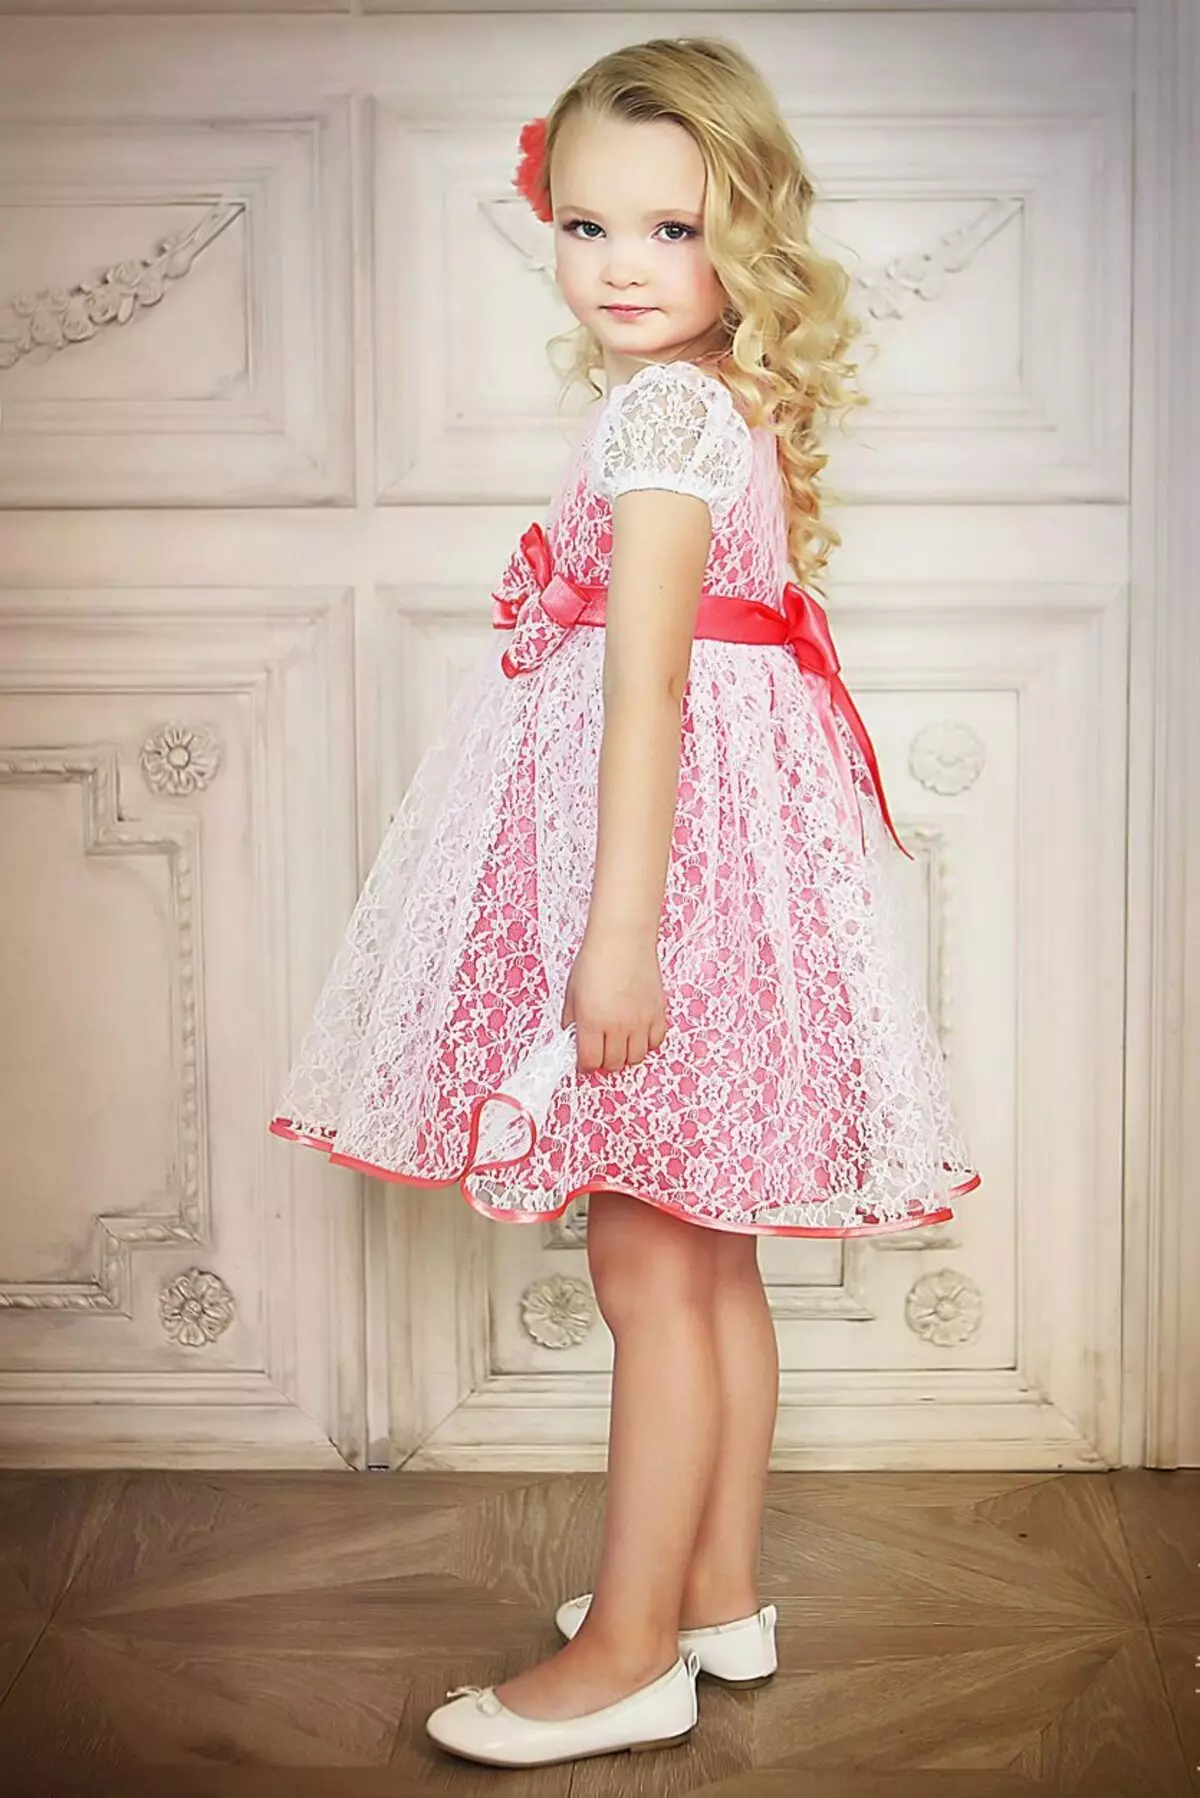 Elegant dress for girl 2-3 years old lace.